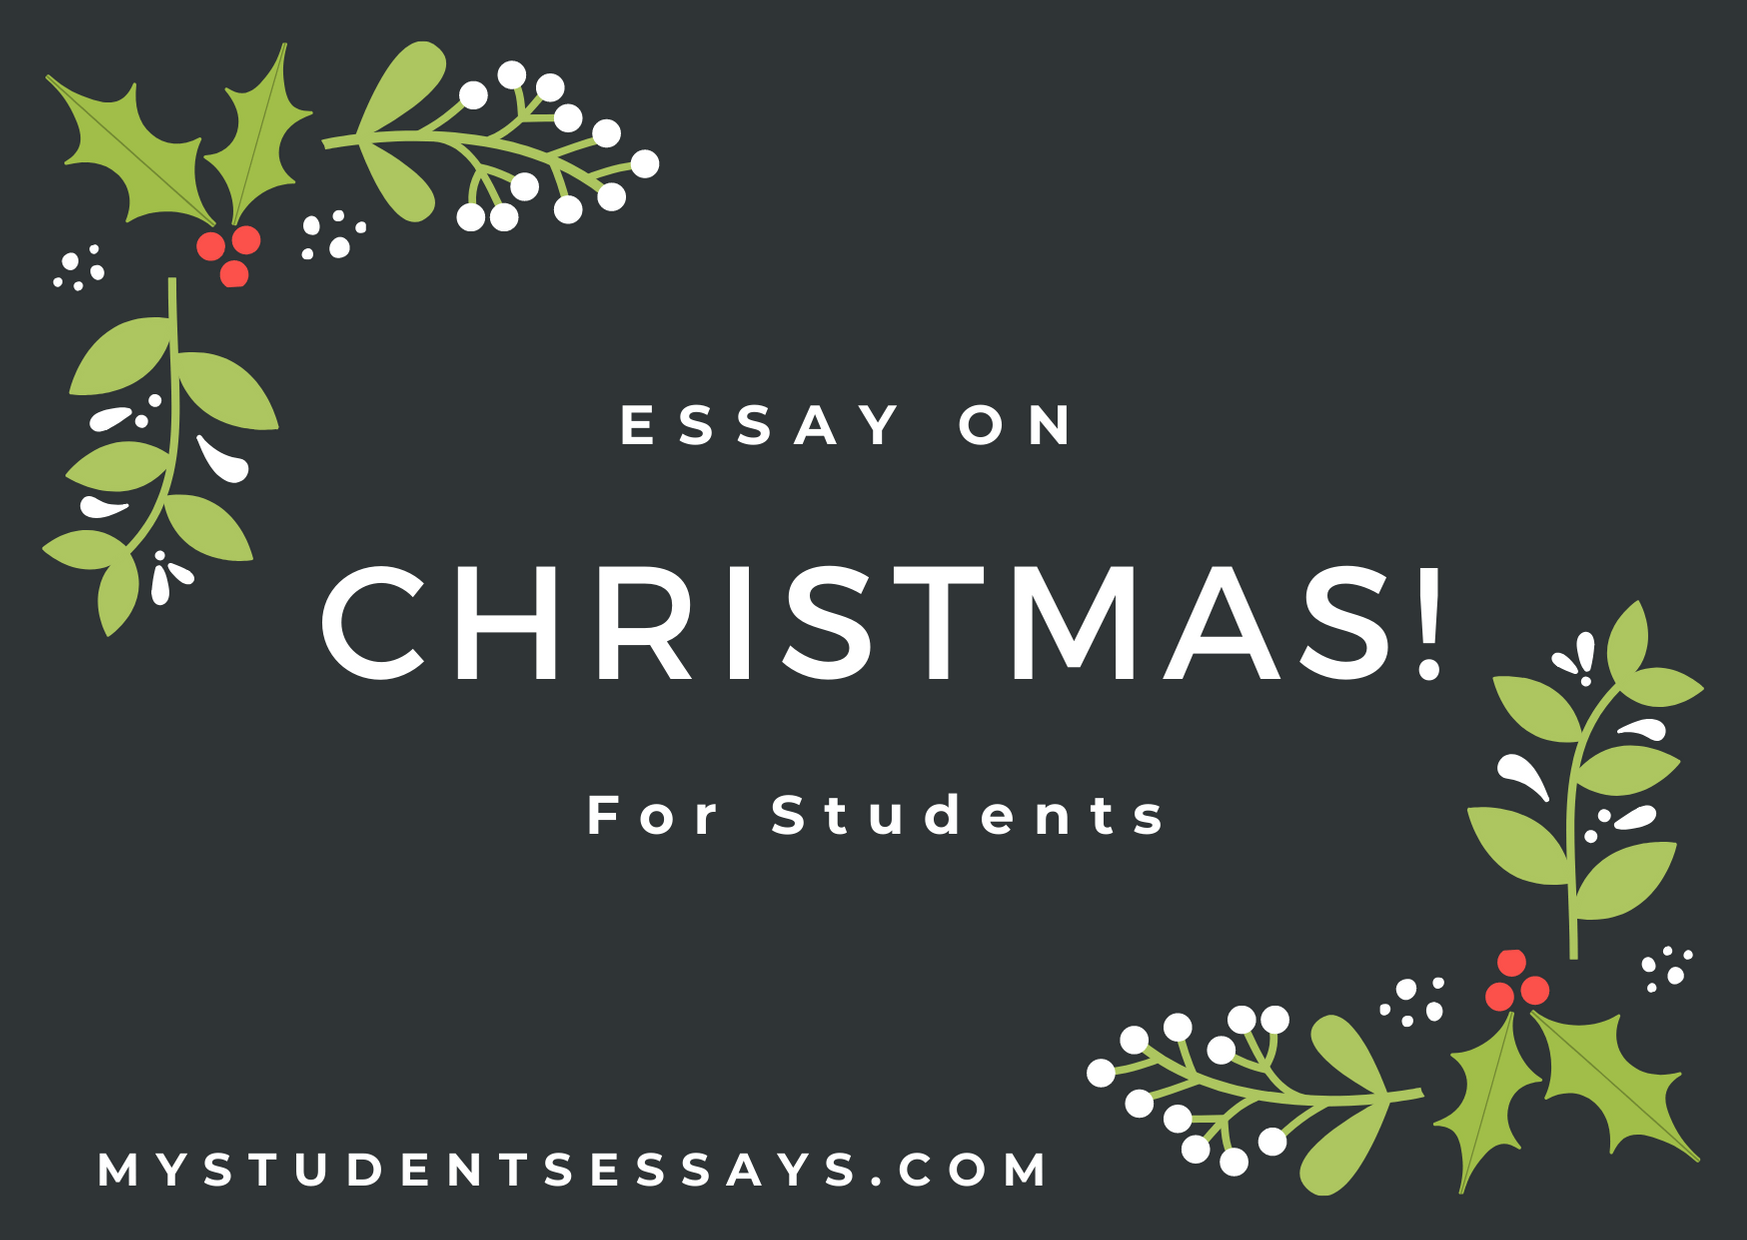 Essay on Christmas for Students